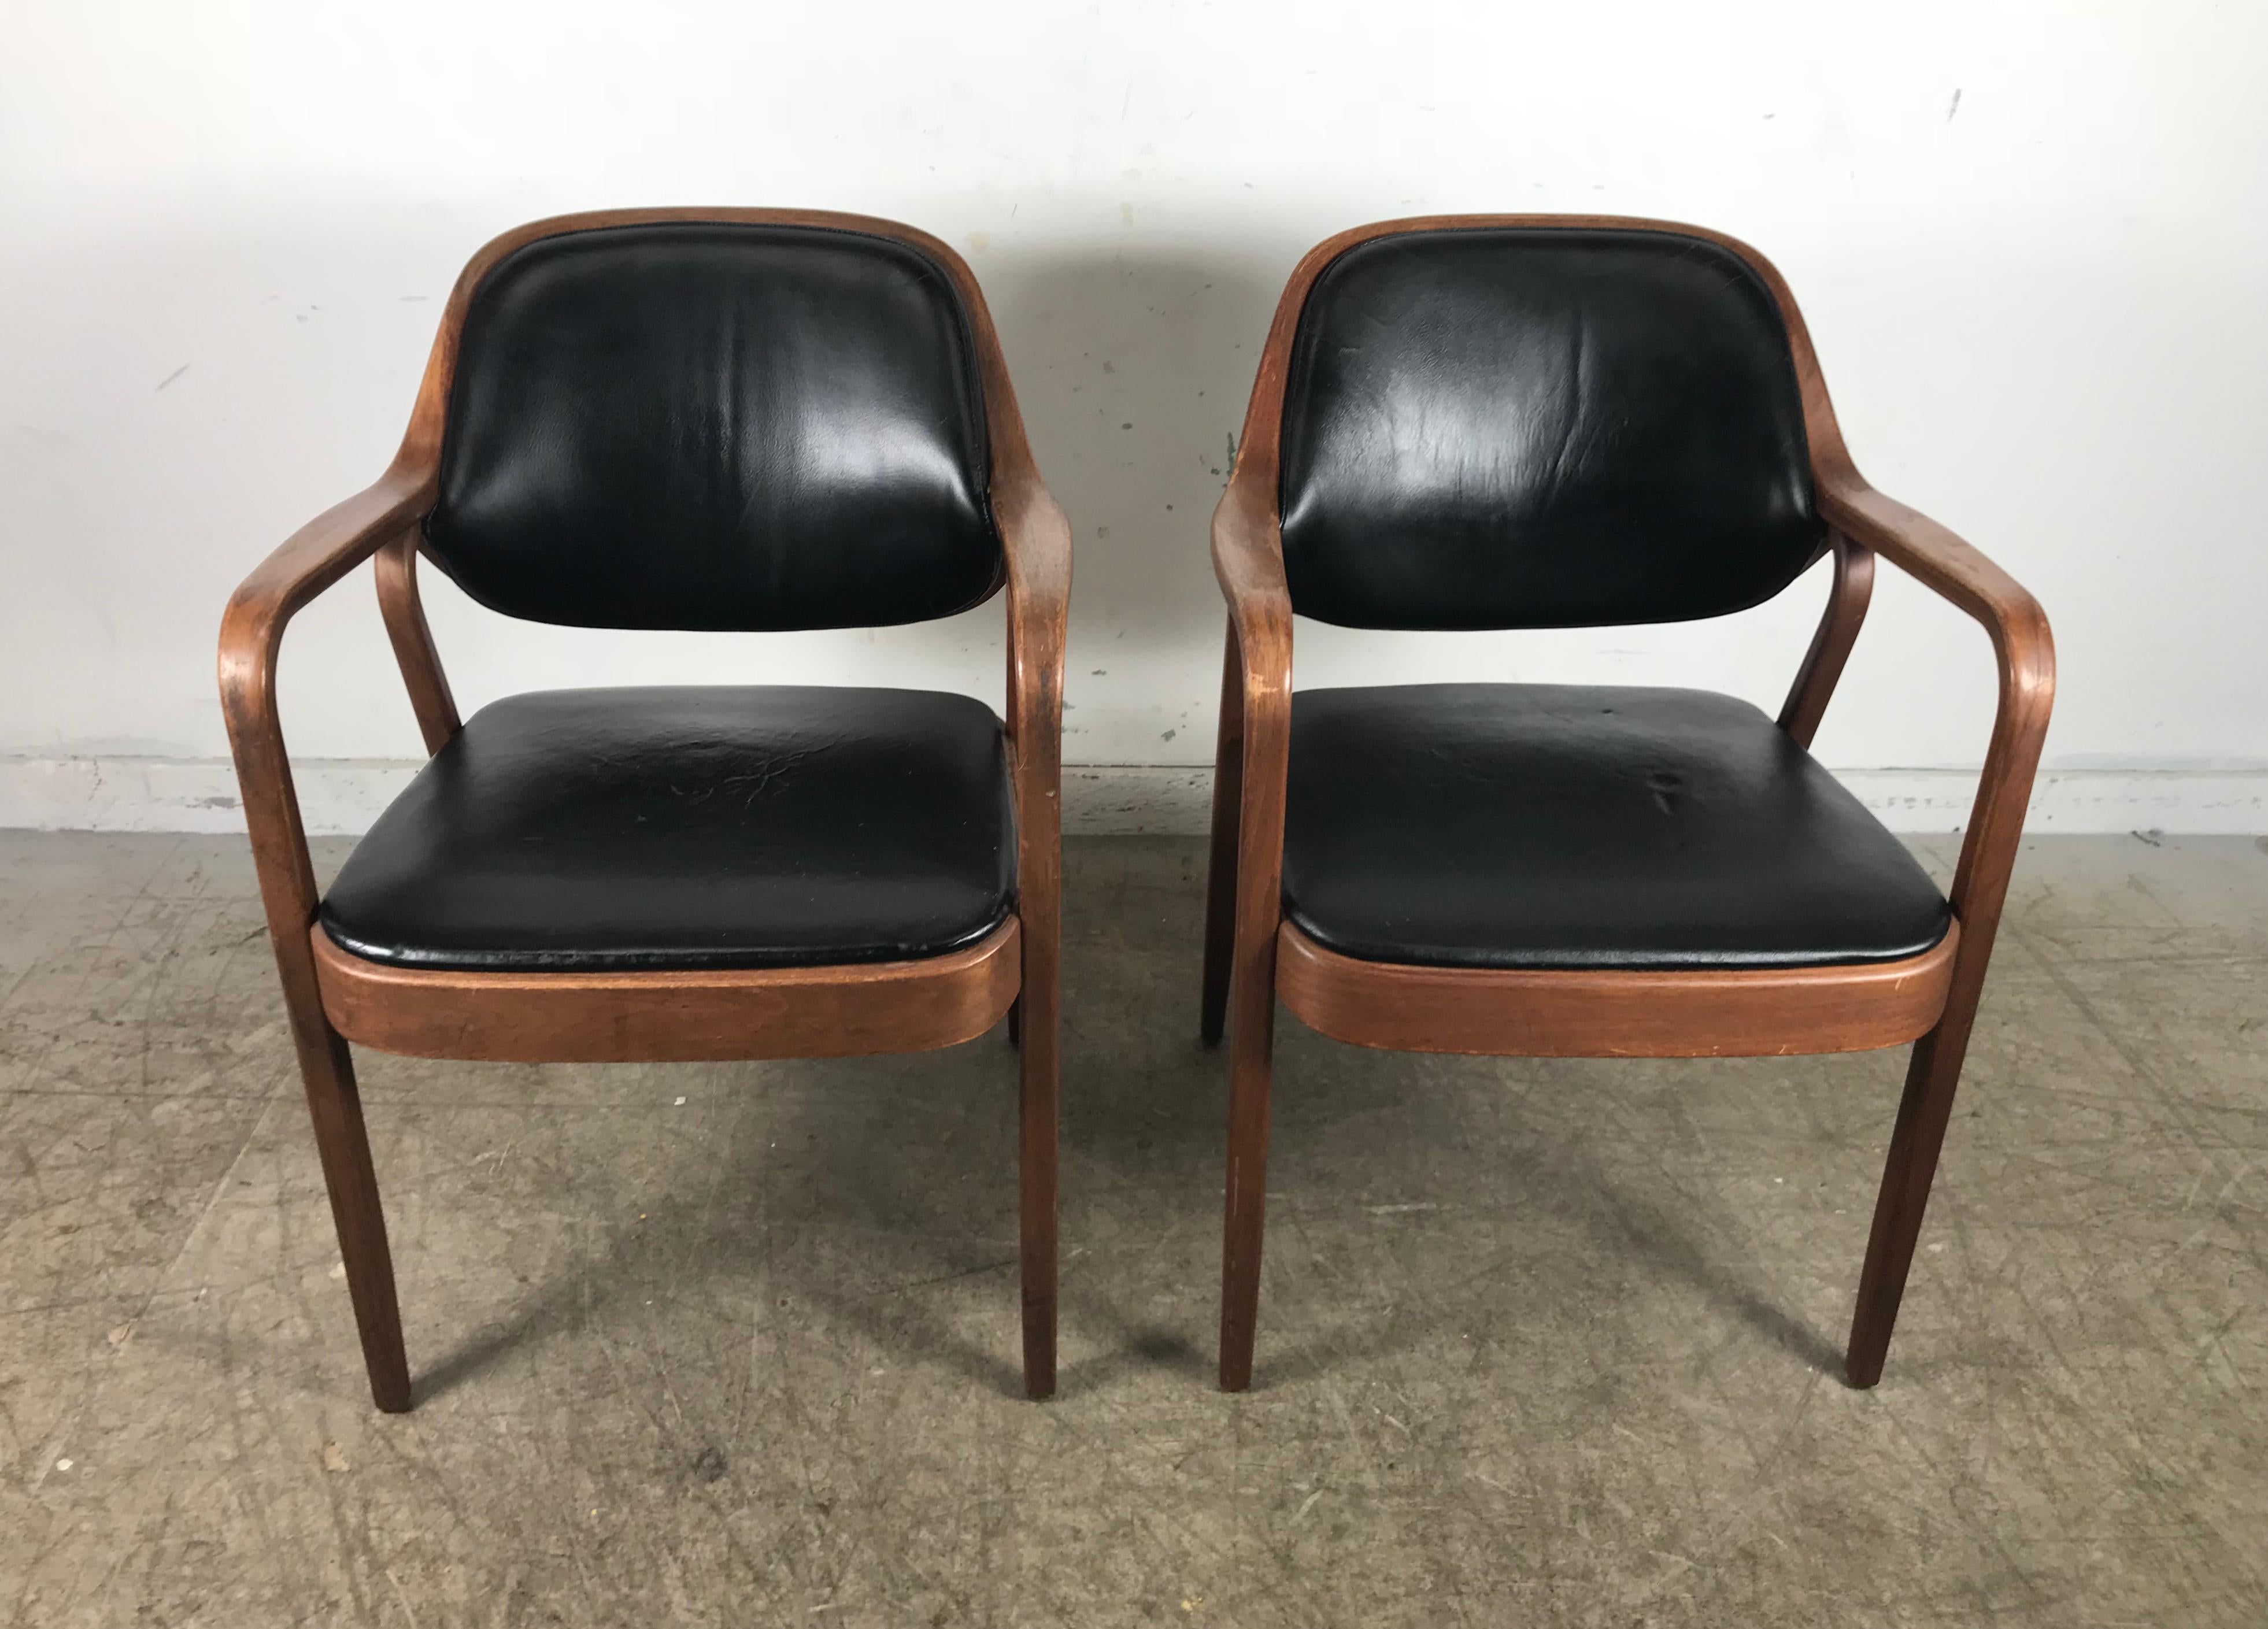 Pair of Modernist Bentwood Mahogany and Leather Chairs by Don Pettit for Knoll 8